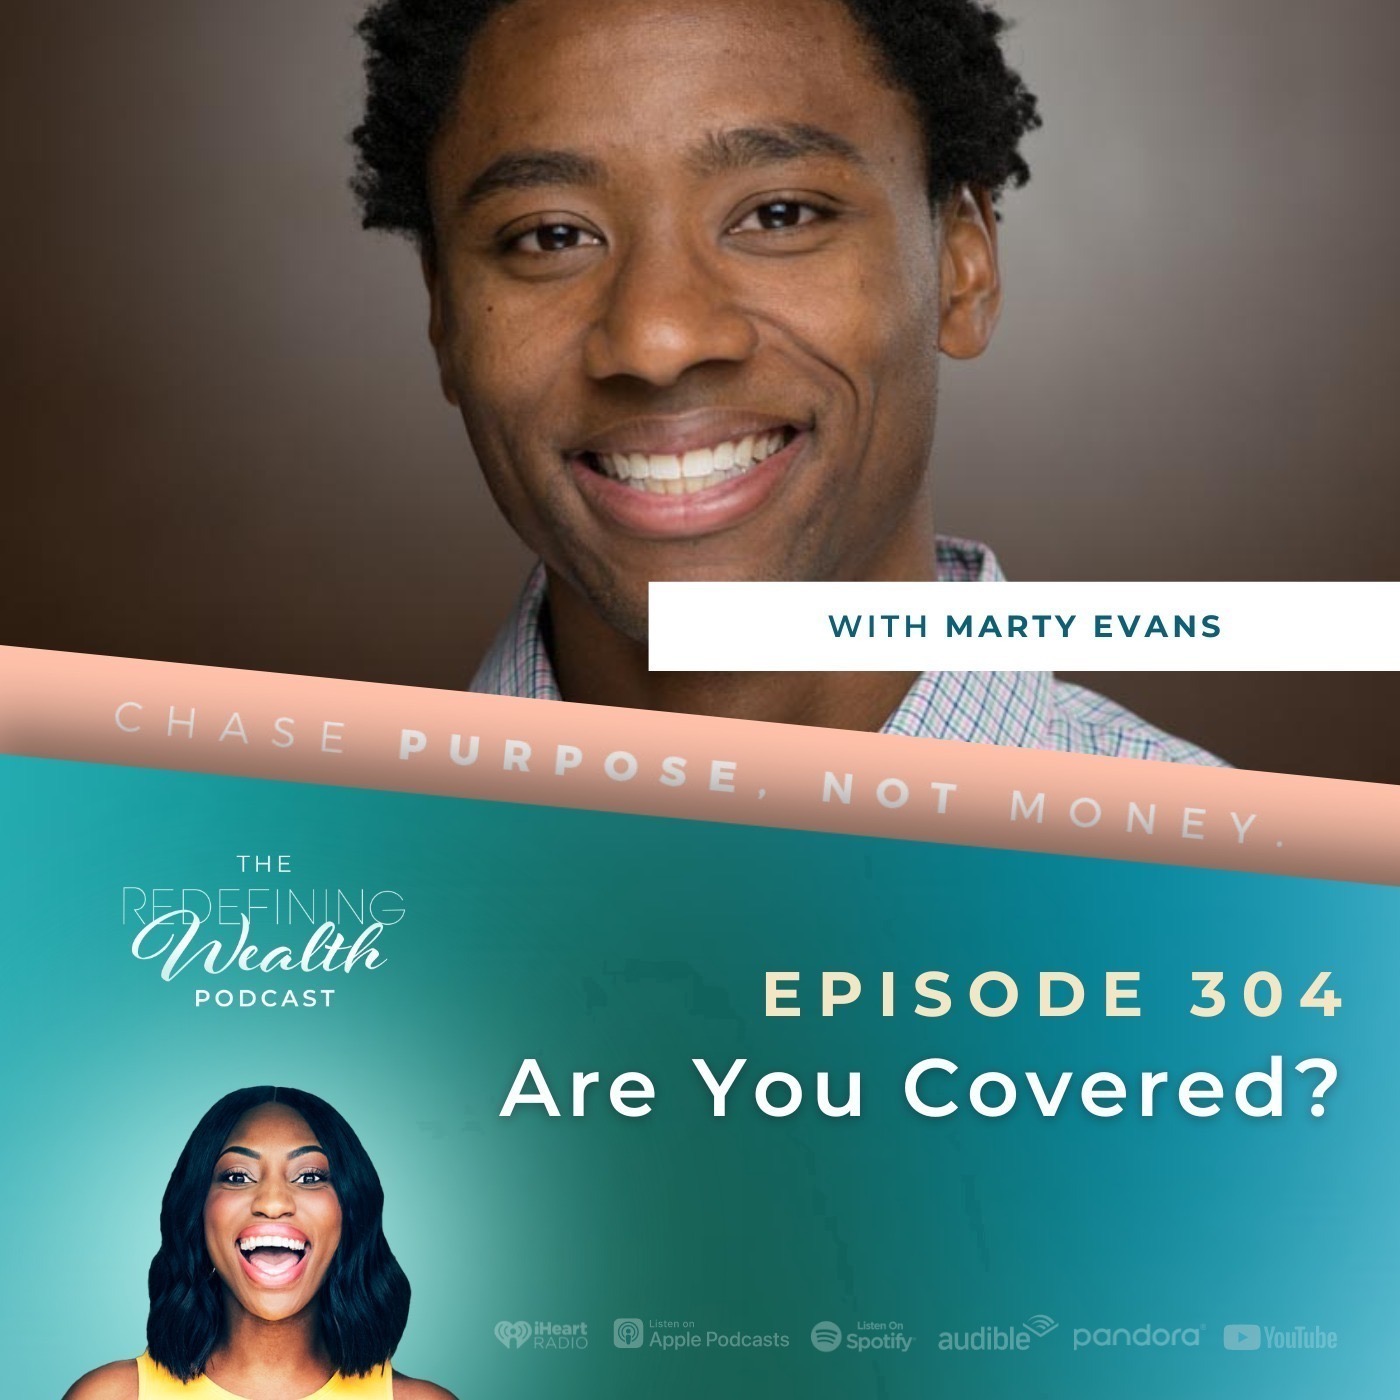 Marty Evans: Are You Covered?